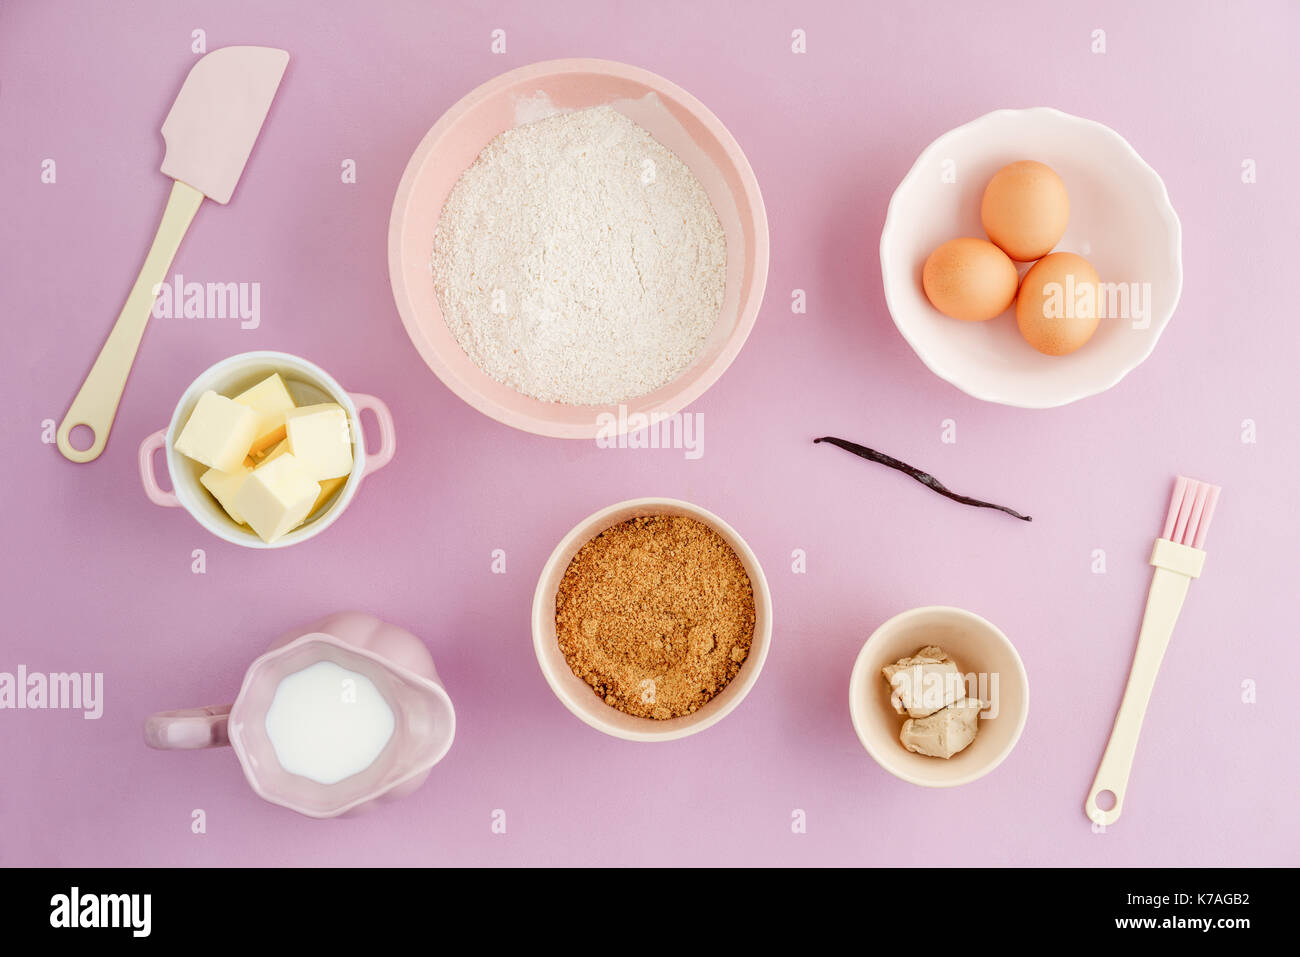 Flatlay collection of tools and ingredients for home baking on pink background shot from above Stock Photo